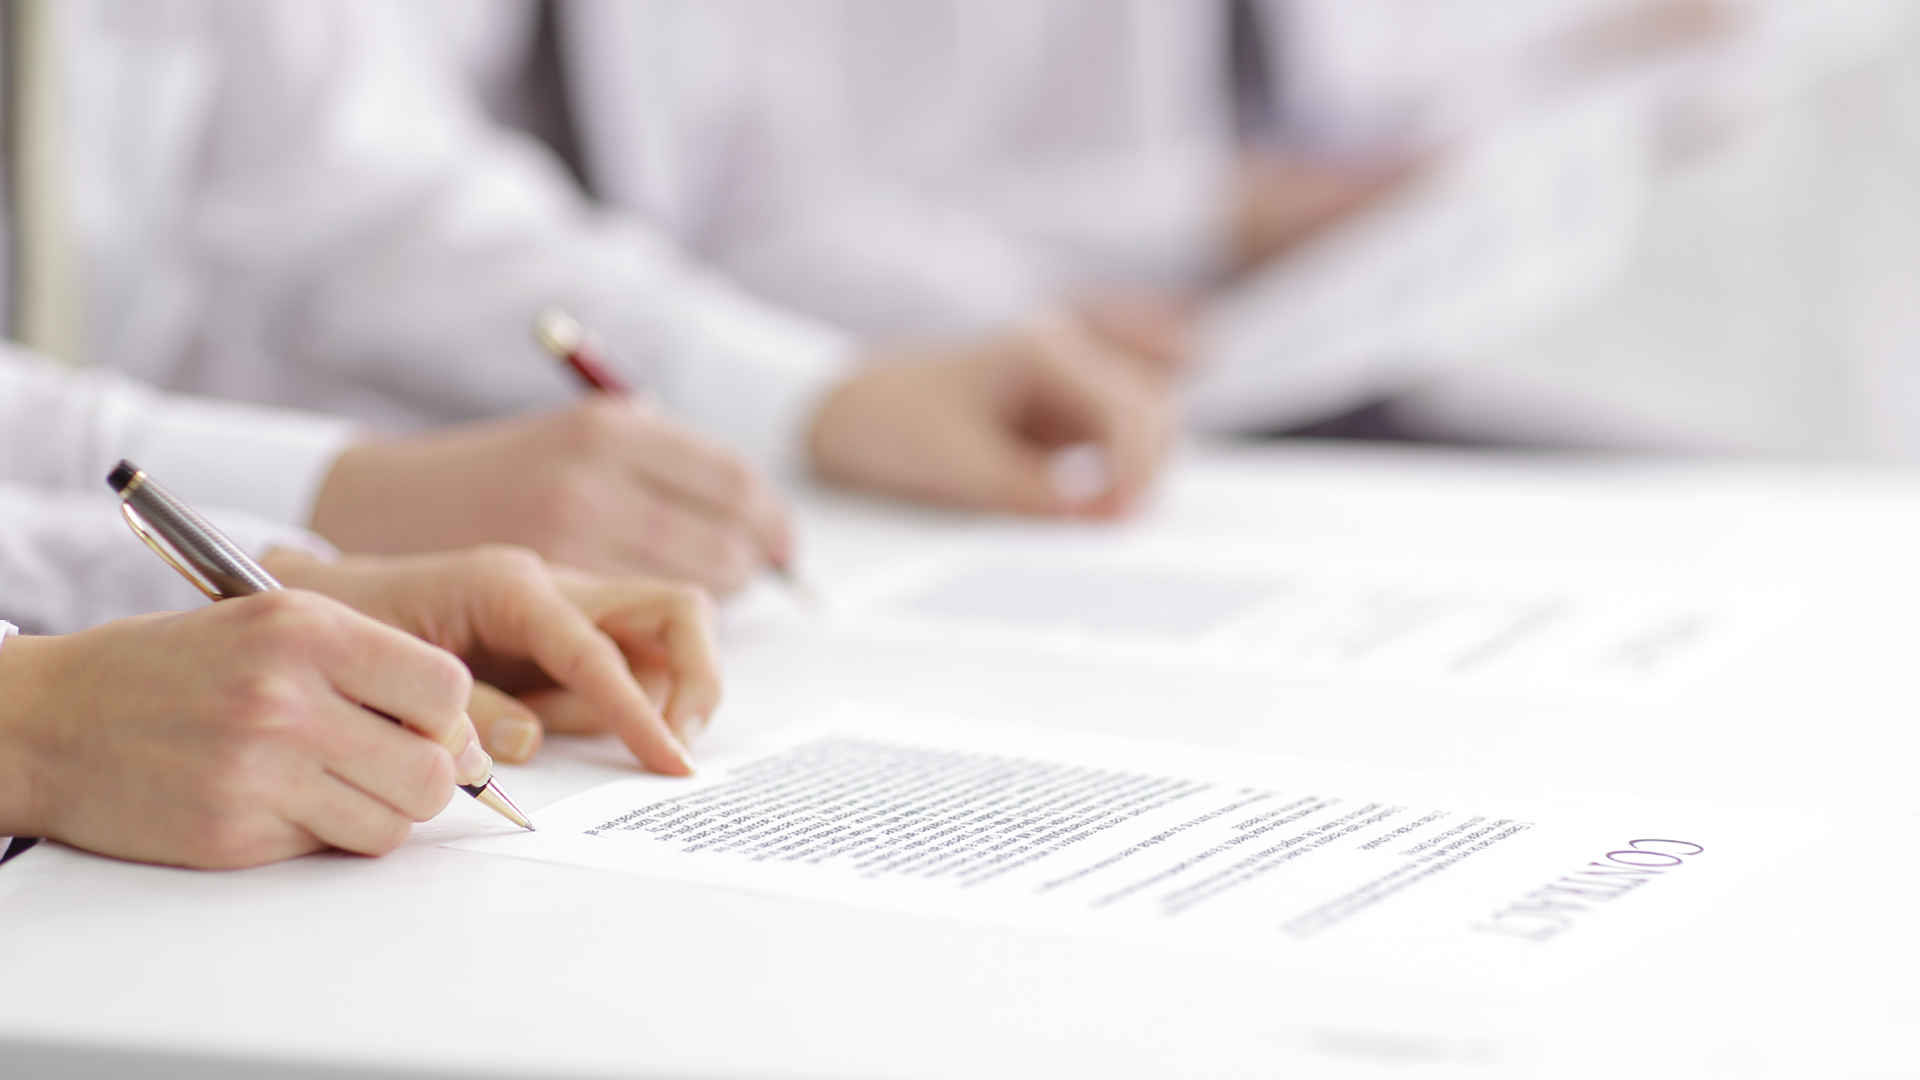 Protection of know-how and confidentiality clauses in employment contracts